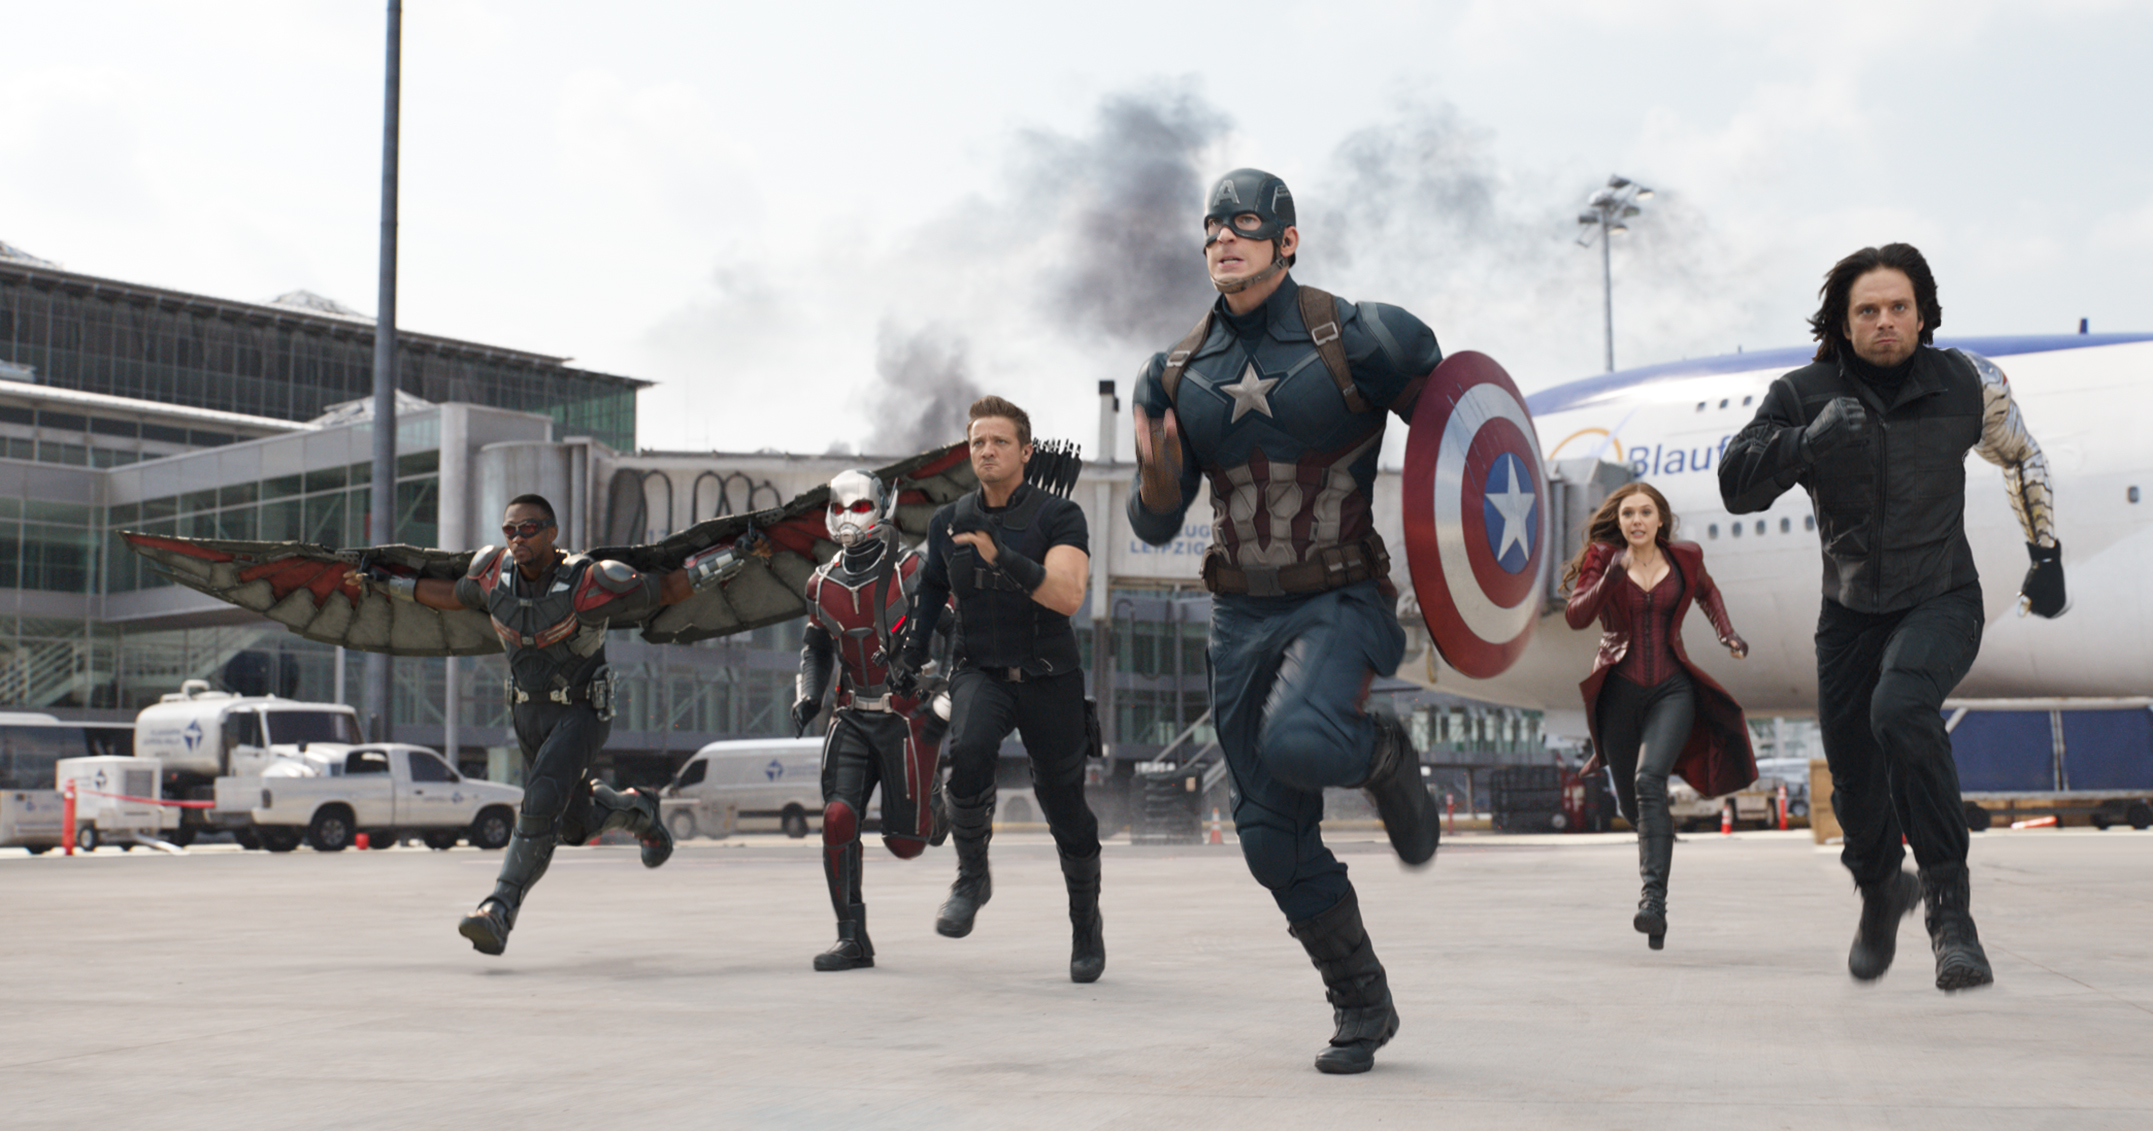 'Captain America: Civil War' will go down as one of the greatest superhero movies ever